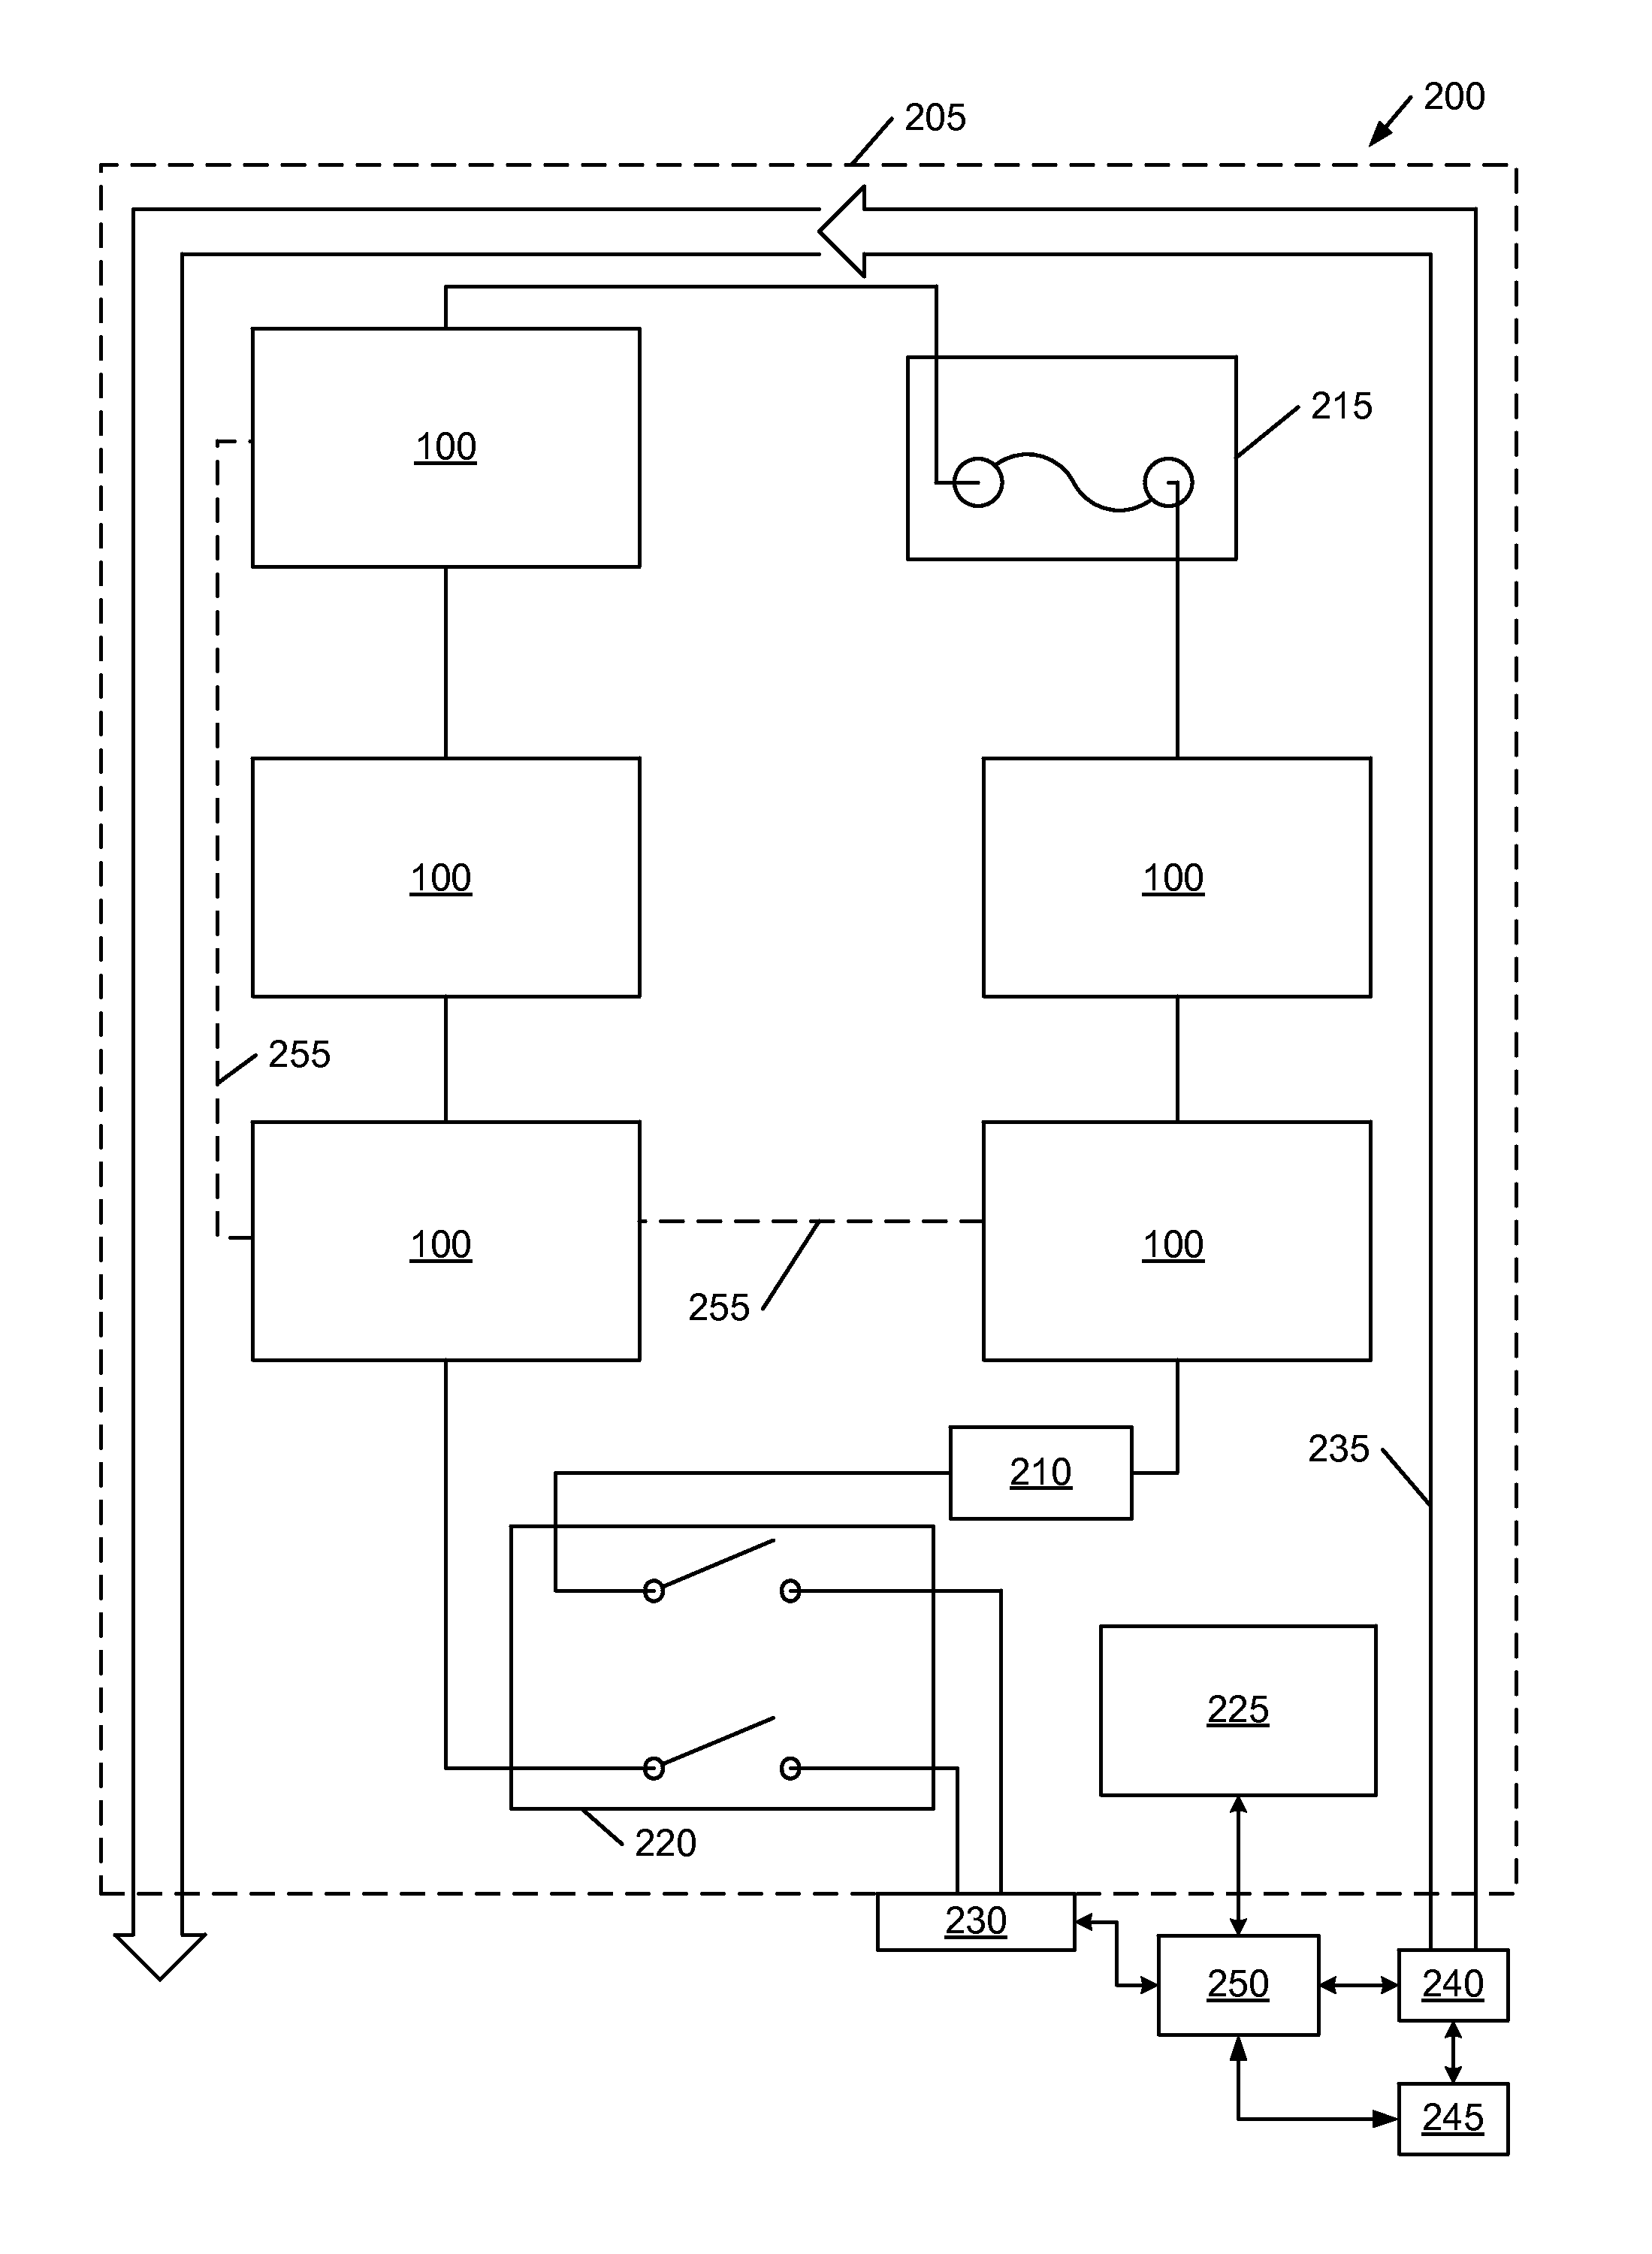 Detection of over-current shorts in a battery pack using pattern recognition